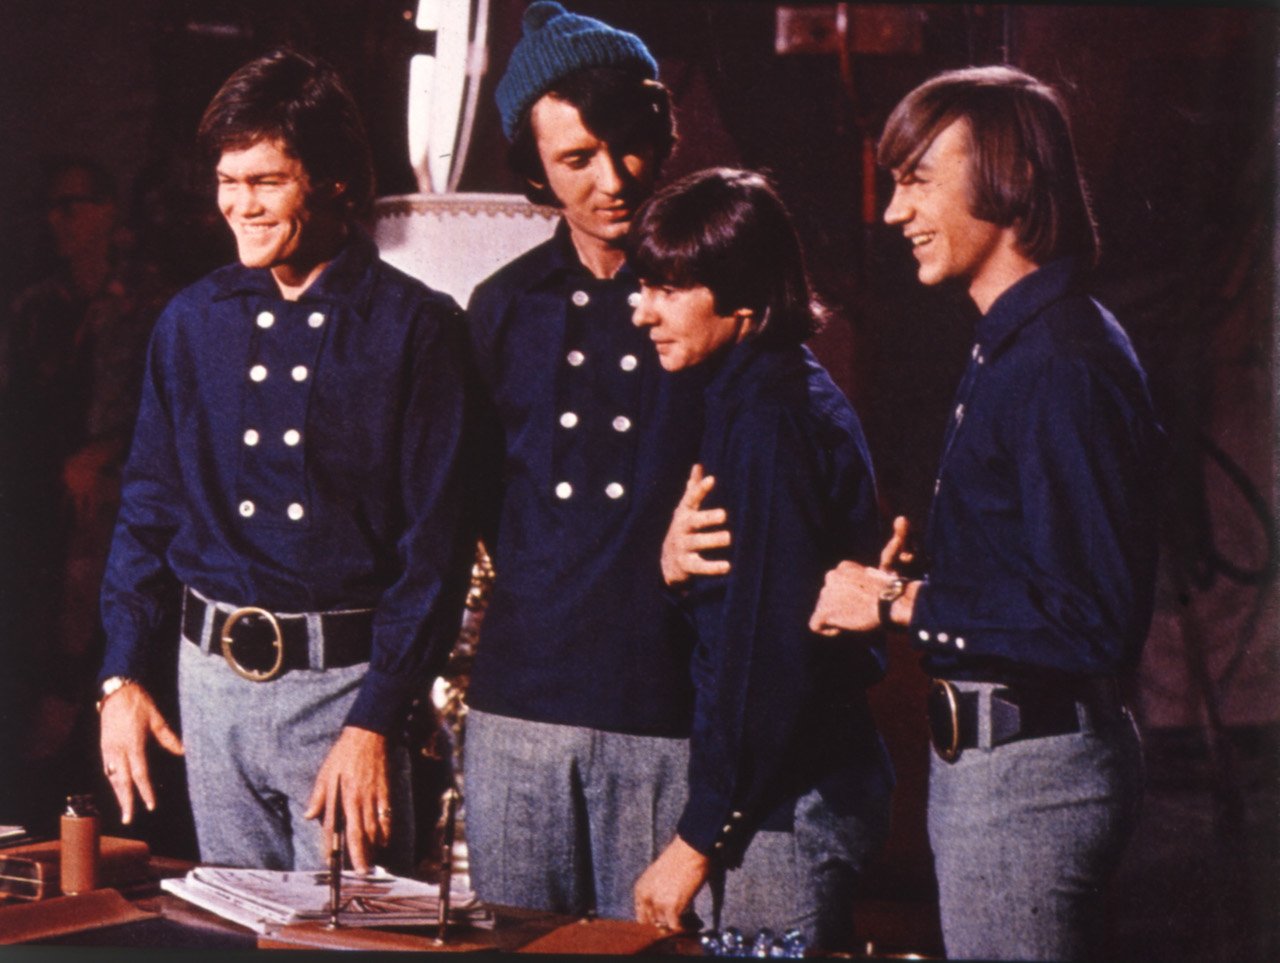 (l-r) Micky Dolenz, Mike Nesmith, Davy Jones, and Peter Tork. Davy Jones said Mike Nesmith's dog once bit him on the head without leaving the ground.